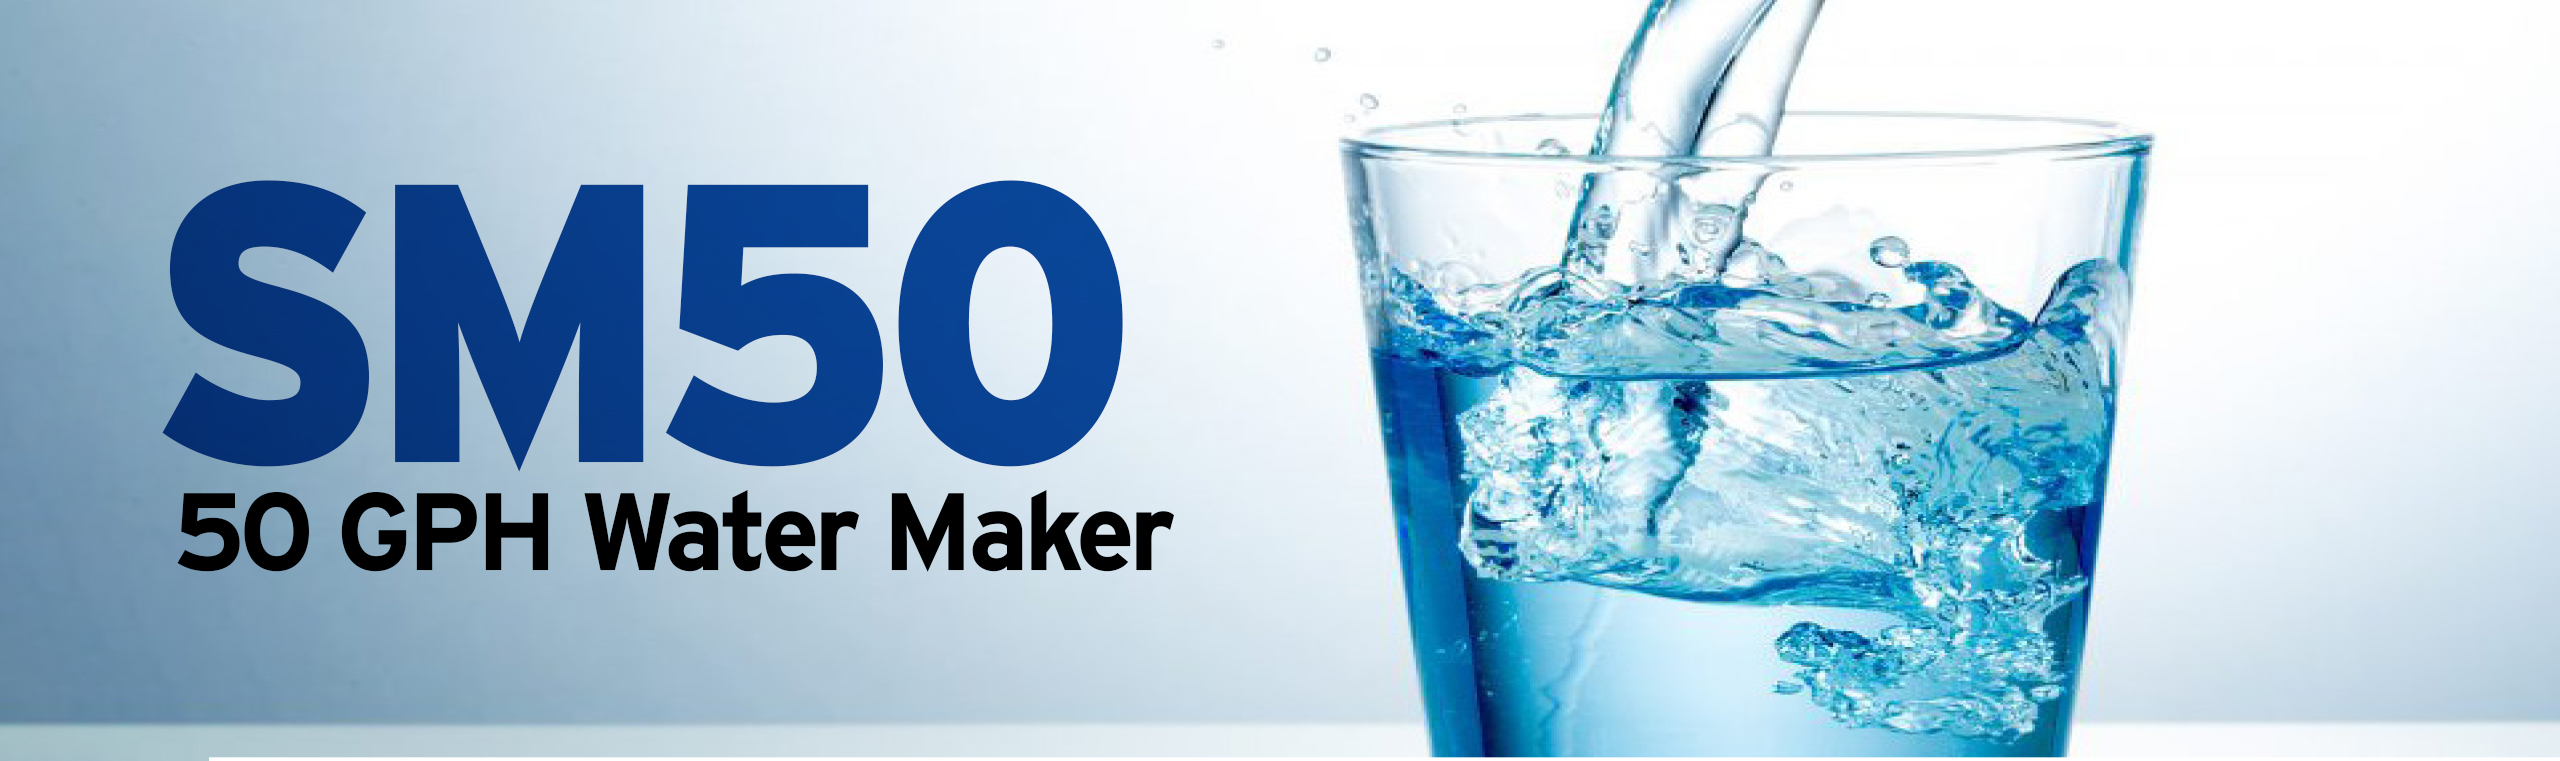 Buy a 50 GPH Semi-automated Watermaker - Daily Watermakers